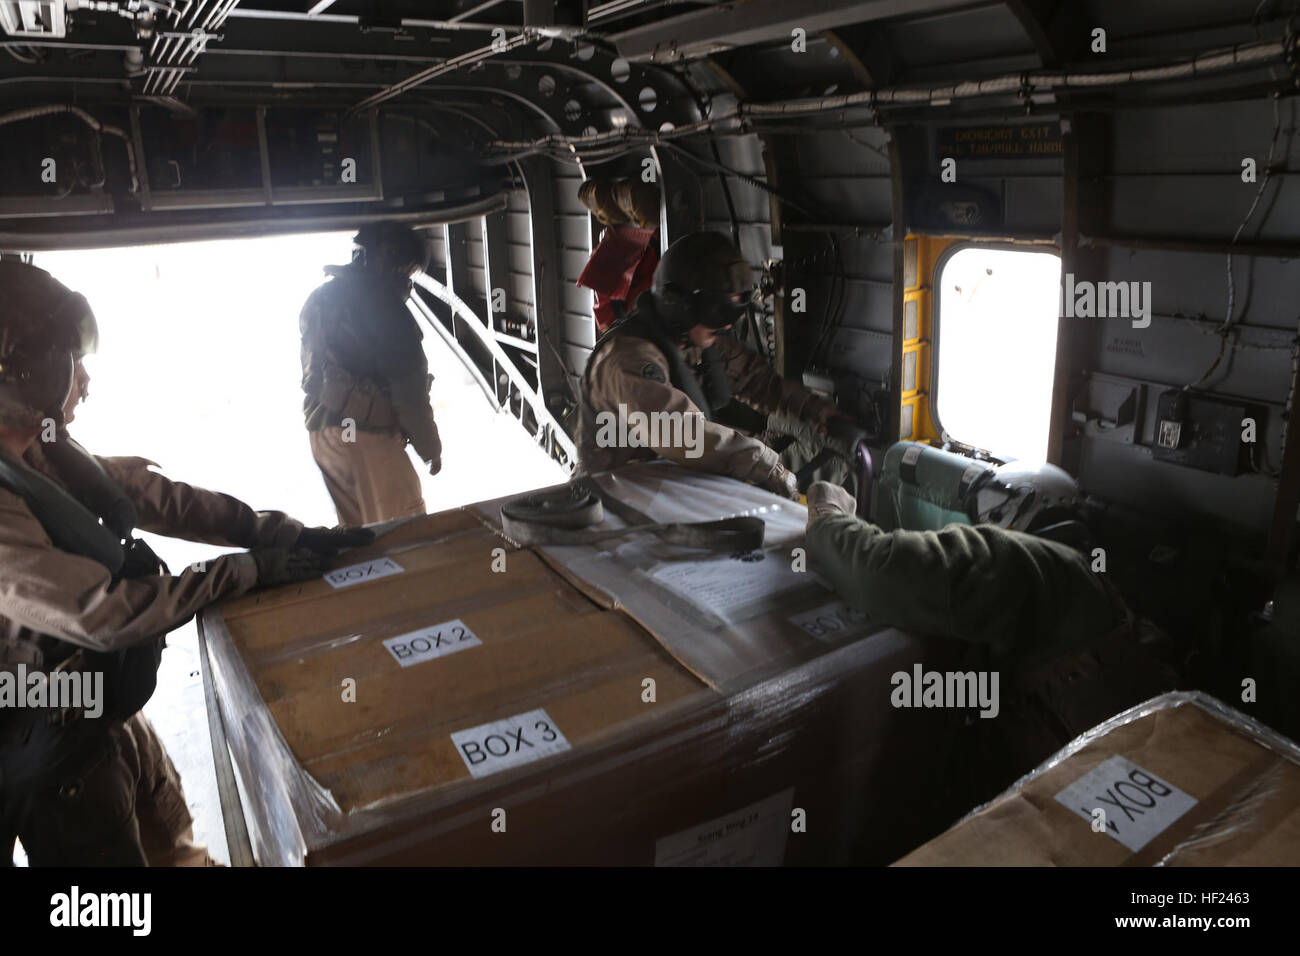 U.S. Marines with Marine Heavy Helicopter Squadron (HMH) 464, Detachment A, 31st Marine Expeditionary Unit, conduct a logistic resupply mission in a CH-53E Super Stallion helicopter from the U.S.S. Sacagawea during exercise Ssang Yong 2014 on April 1, 2014. Exercise Ssang Yong is conducted annually in the Republic of Korea (ROK) to enhance the interoperability of U.S. and ROK forces by performing a full spectrum of amphibious operations while showcasing sea-based power projection in the Pacific. (U.S. Marine Corps Photo by Chief Warrant Officer Clinton Runyon, MCIPAC Combat Camera/Released). S Stock Photo